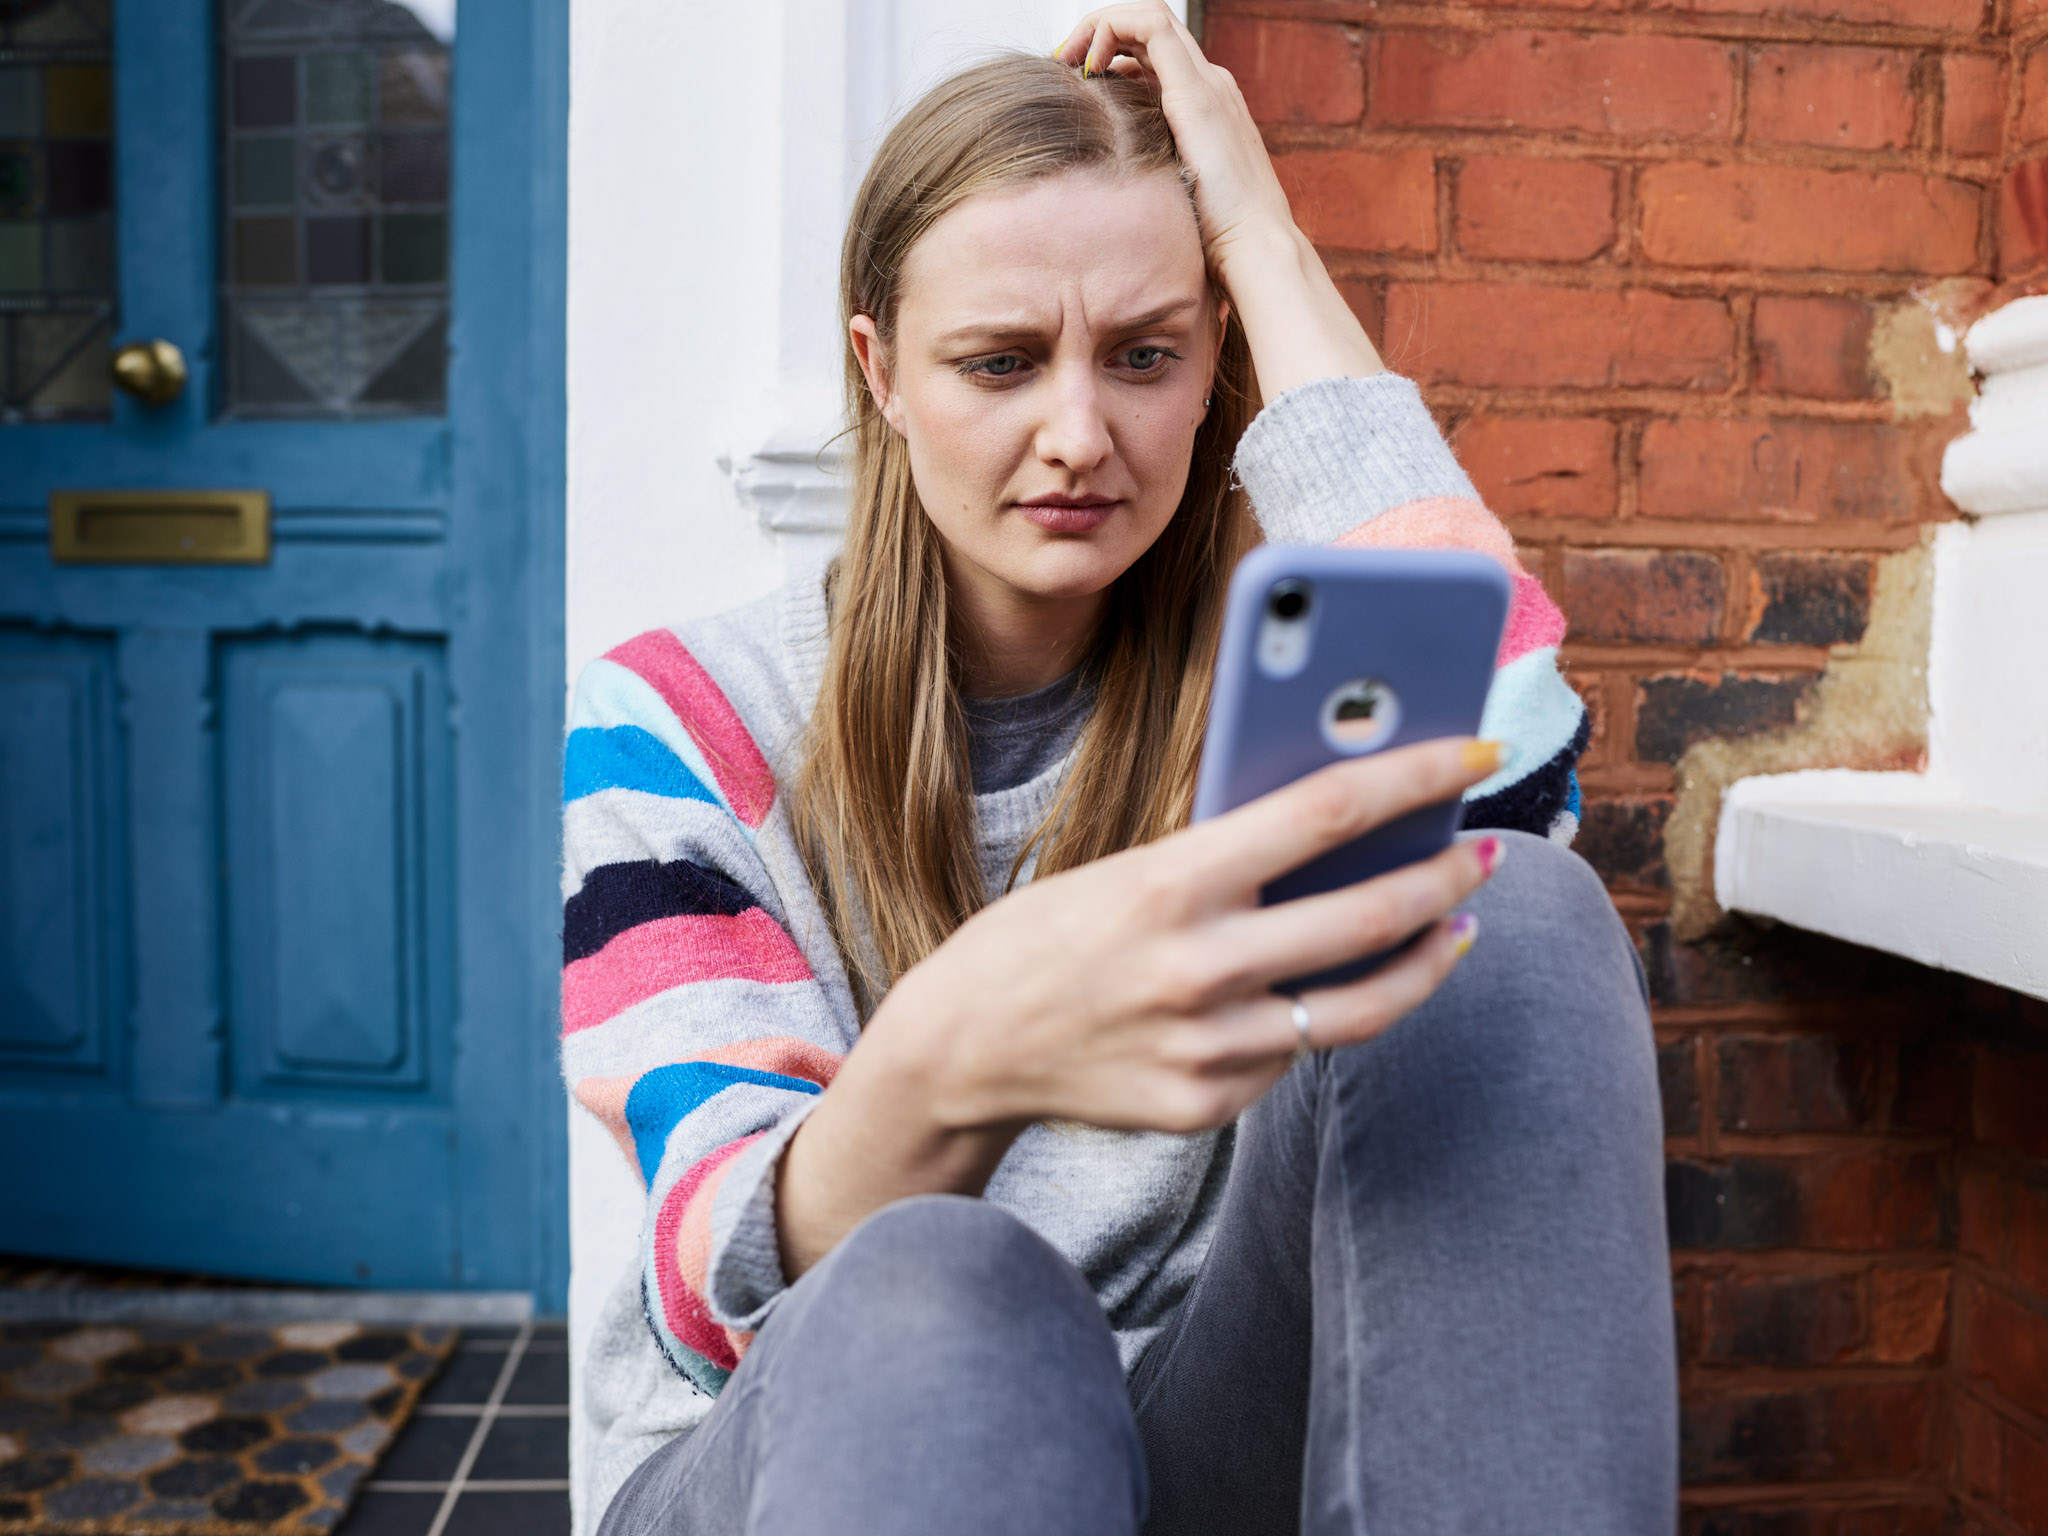 a worried-looking woman sitting on a doorstep while looking at a smartphone